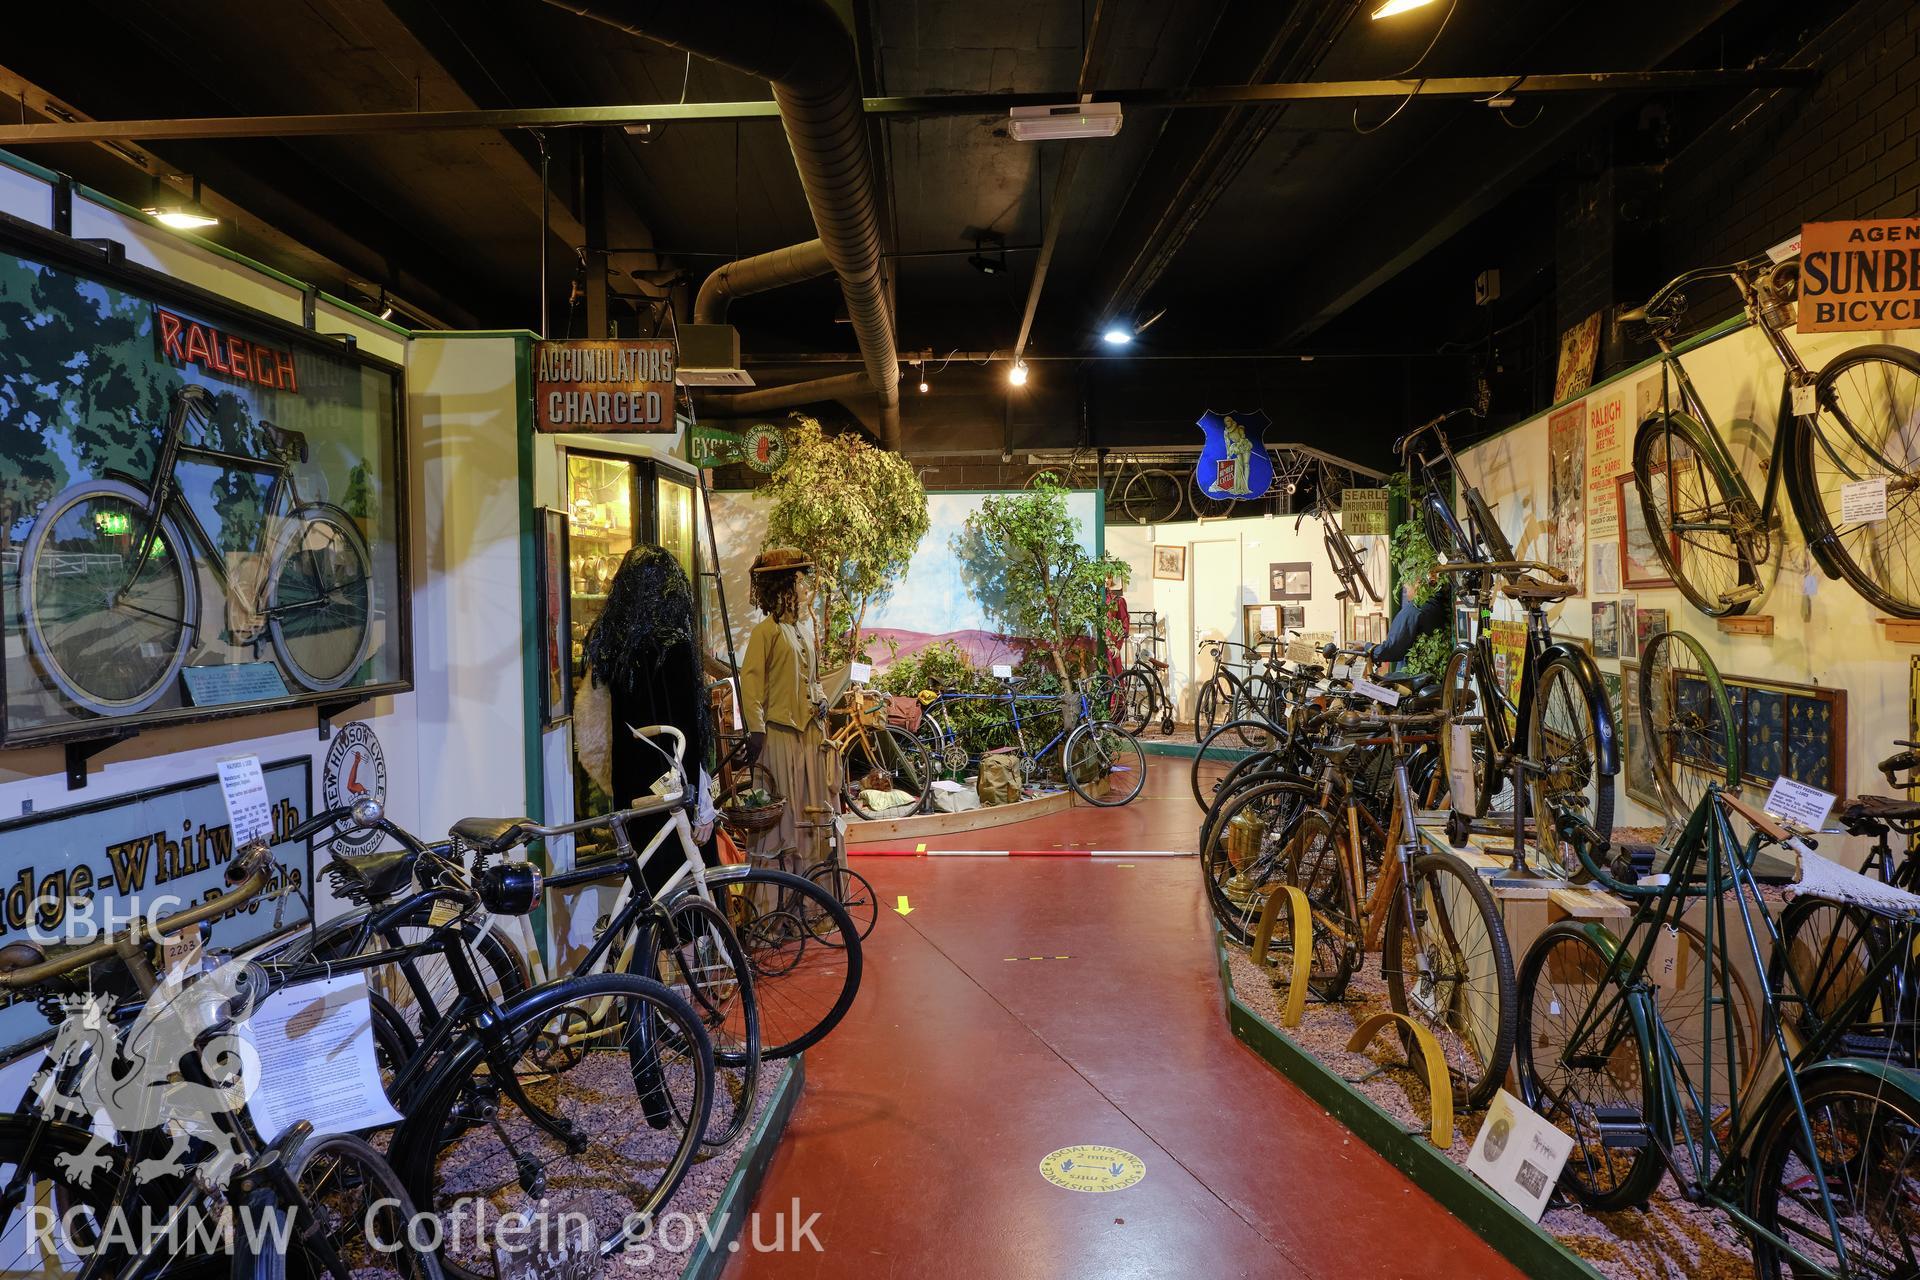 Colour photograph showing Automobile Palace - room G.9, looking SE. and National Cycle Collection exhibits. Produced as part of Historic Building Recording for Automobile Palace, carried out by Richard Hayman, June 2021.